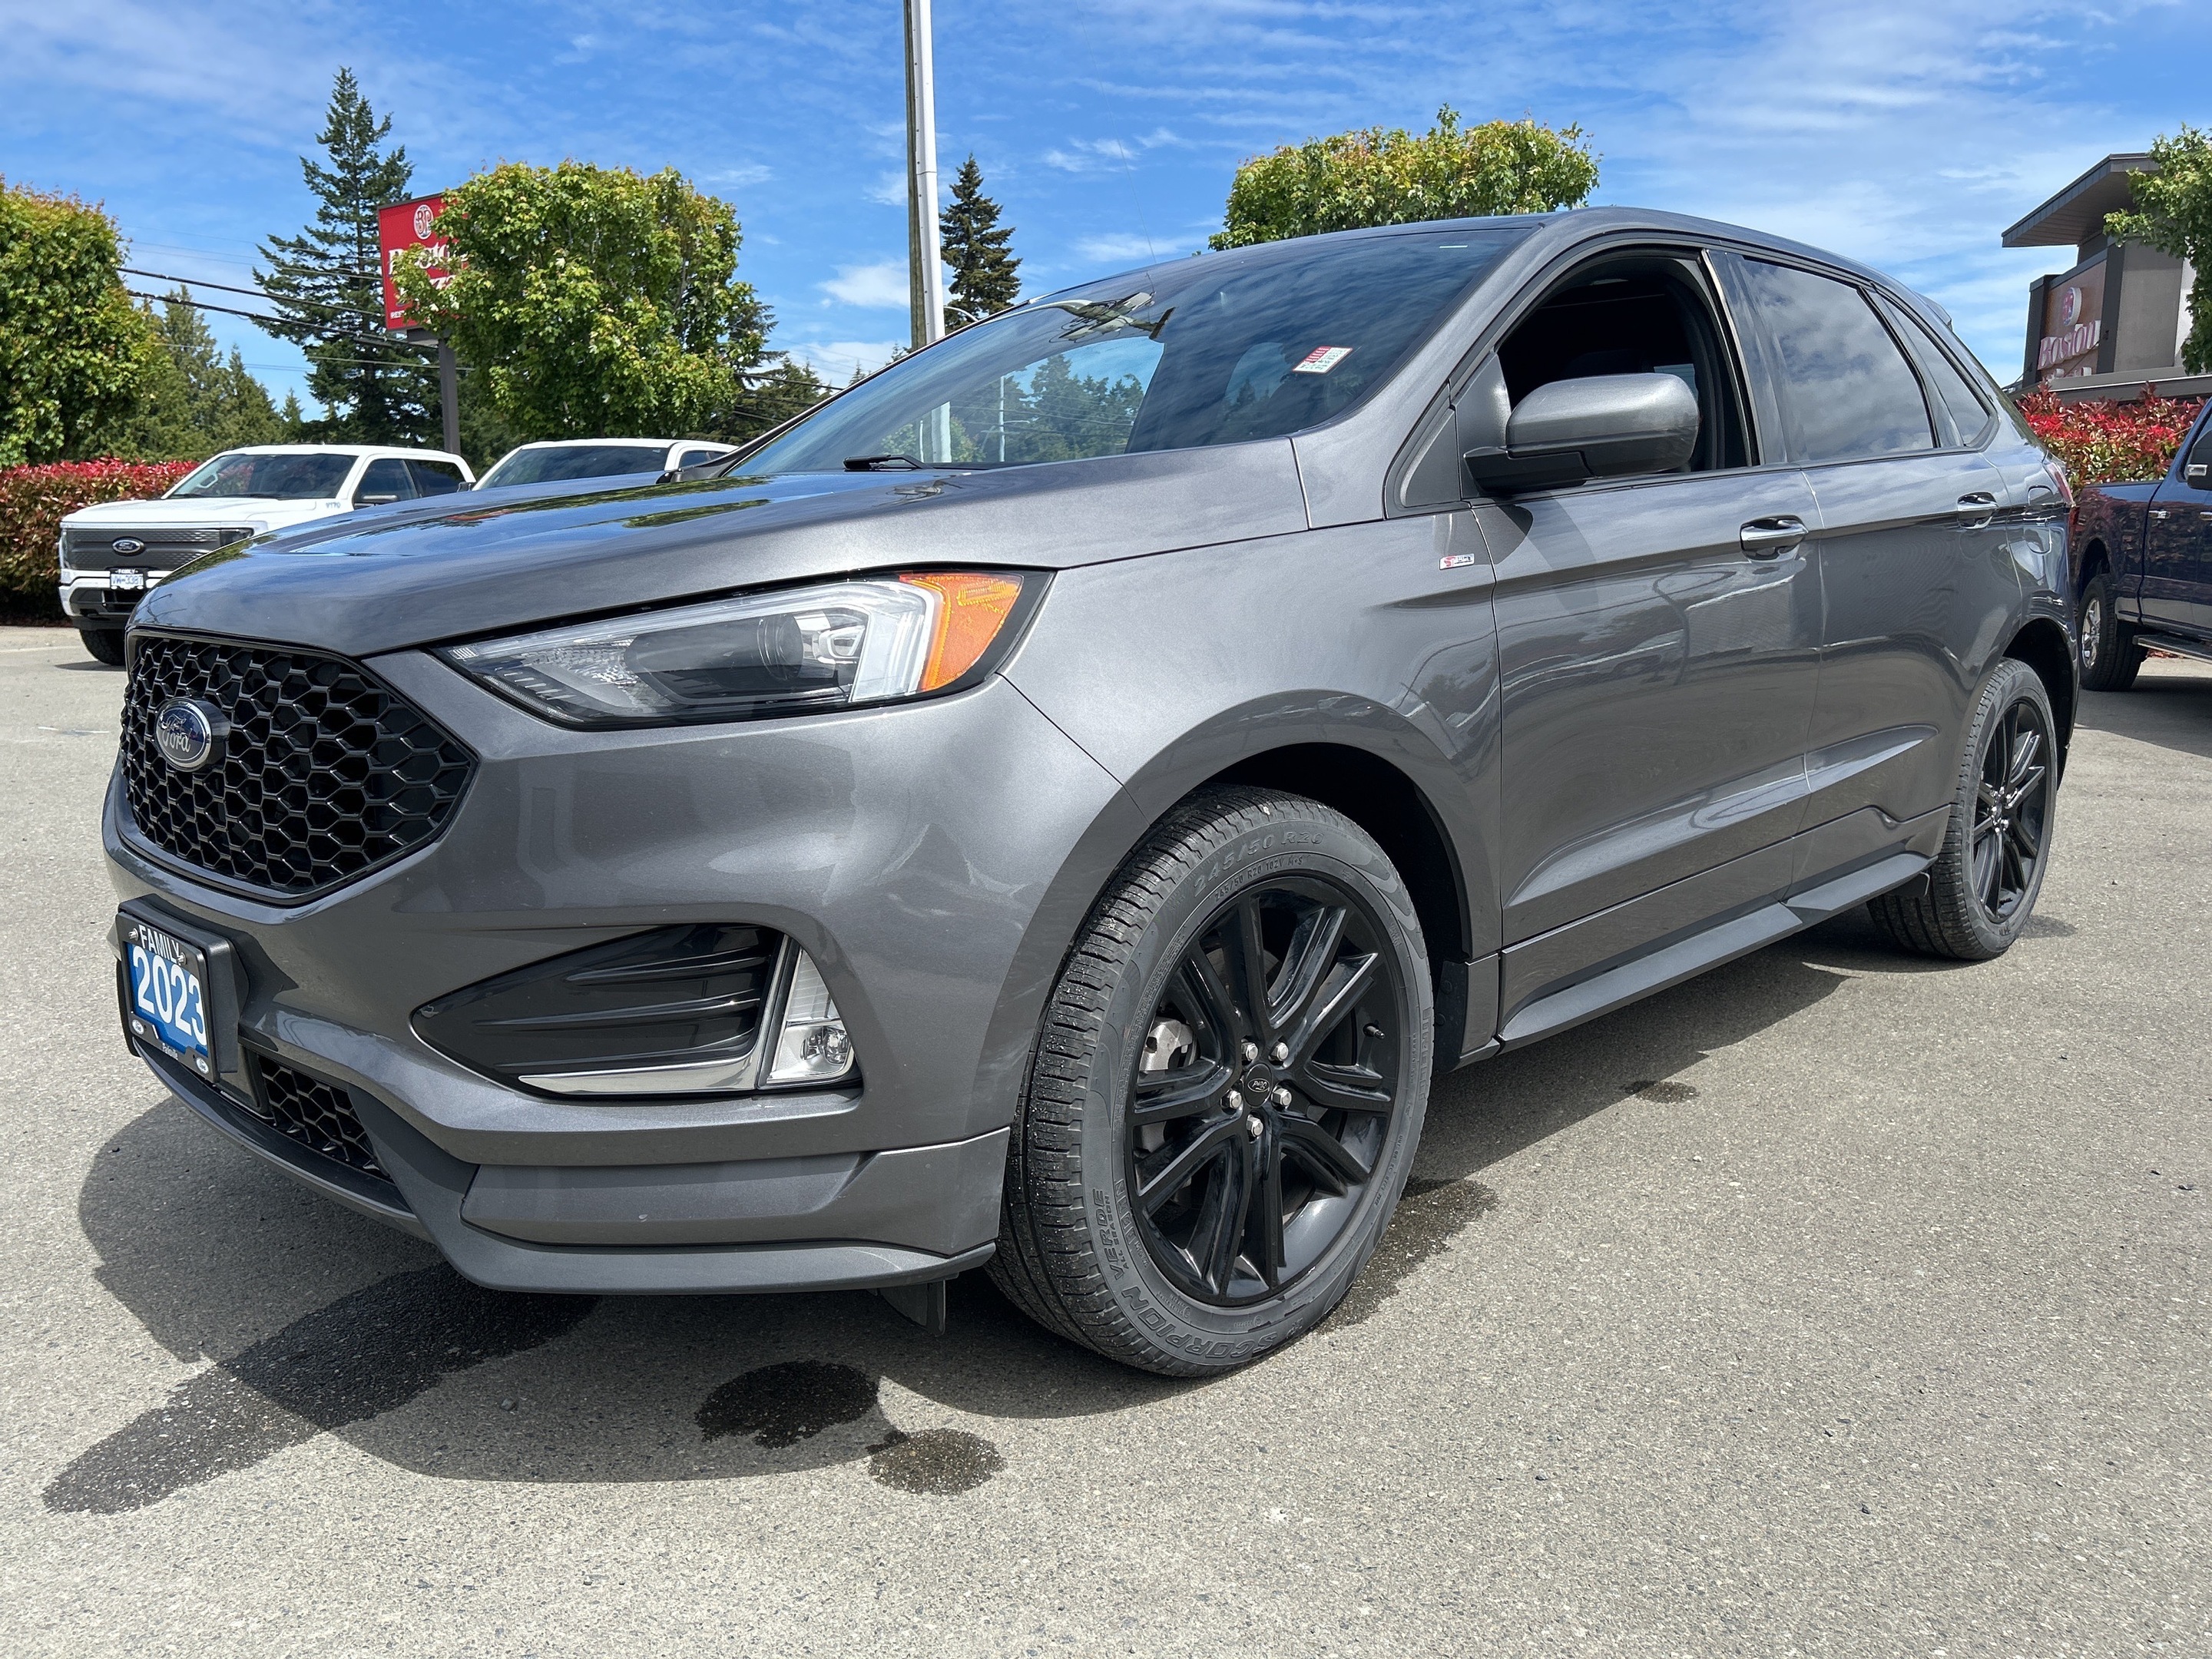 2023 Ford Edge AWD 2.0L Eco-boost Sunroof Tow Pkg Co-pilot 360